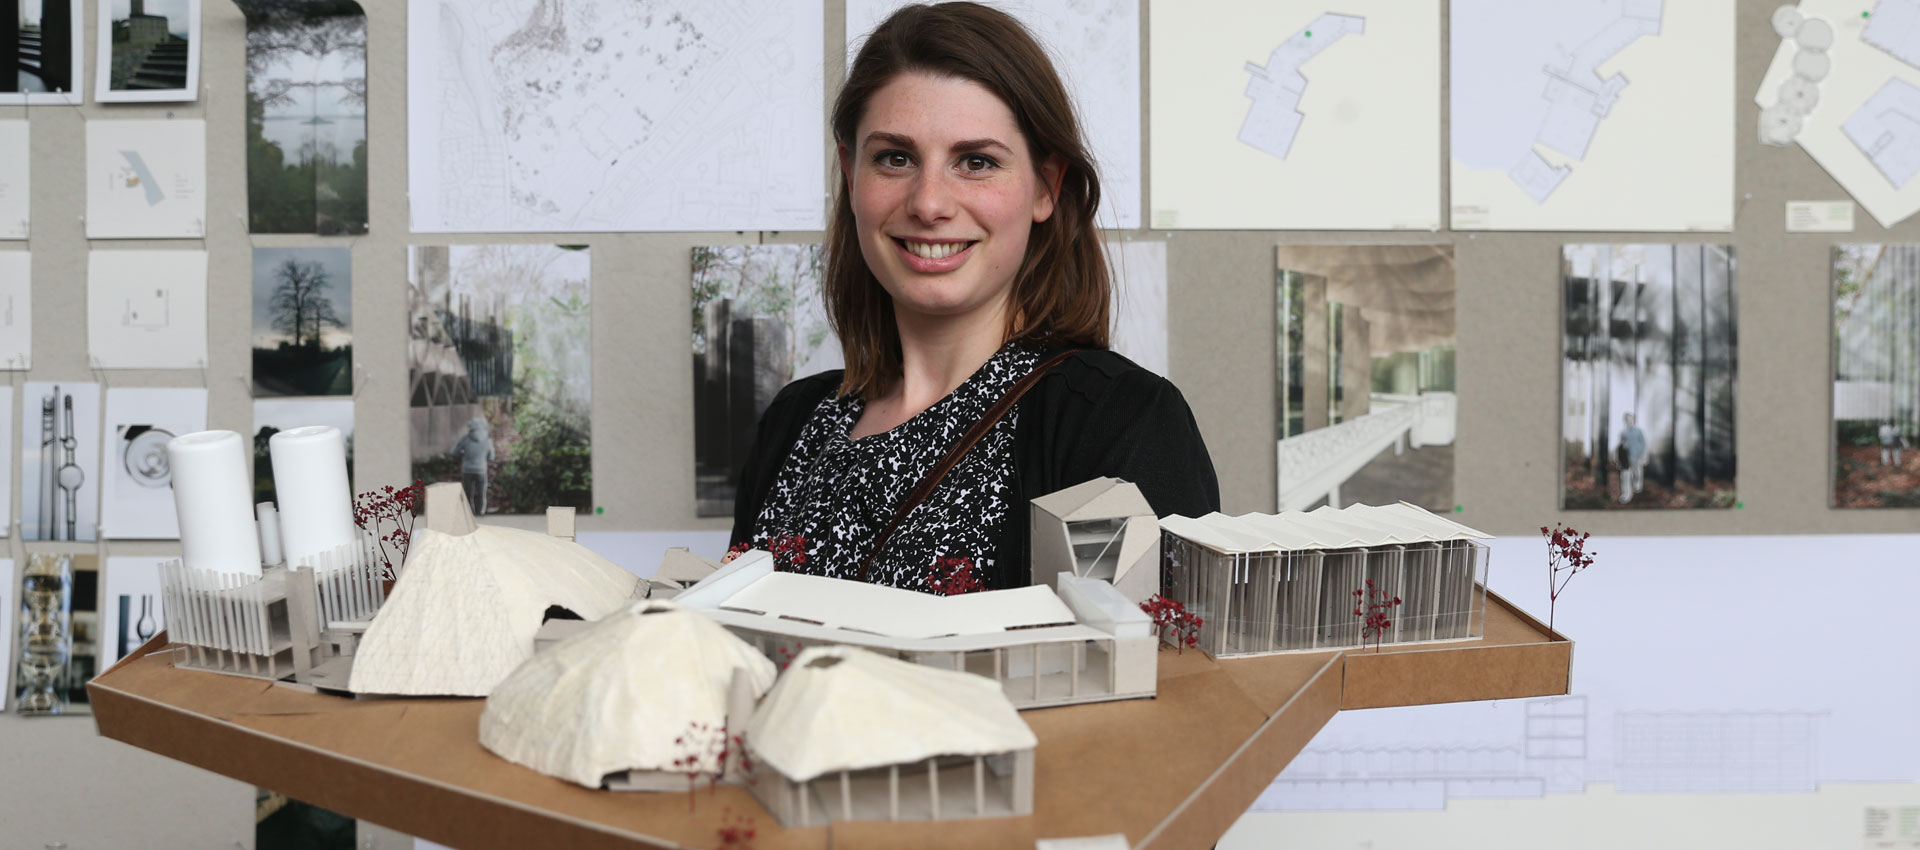 Student with architecture pieces